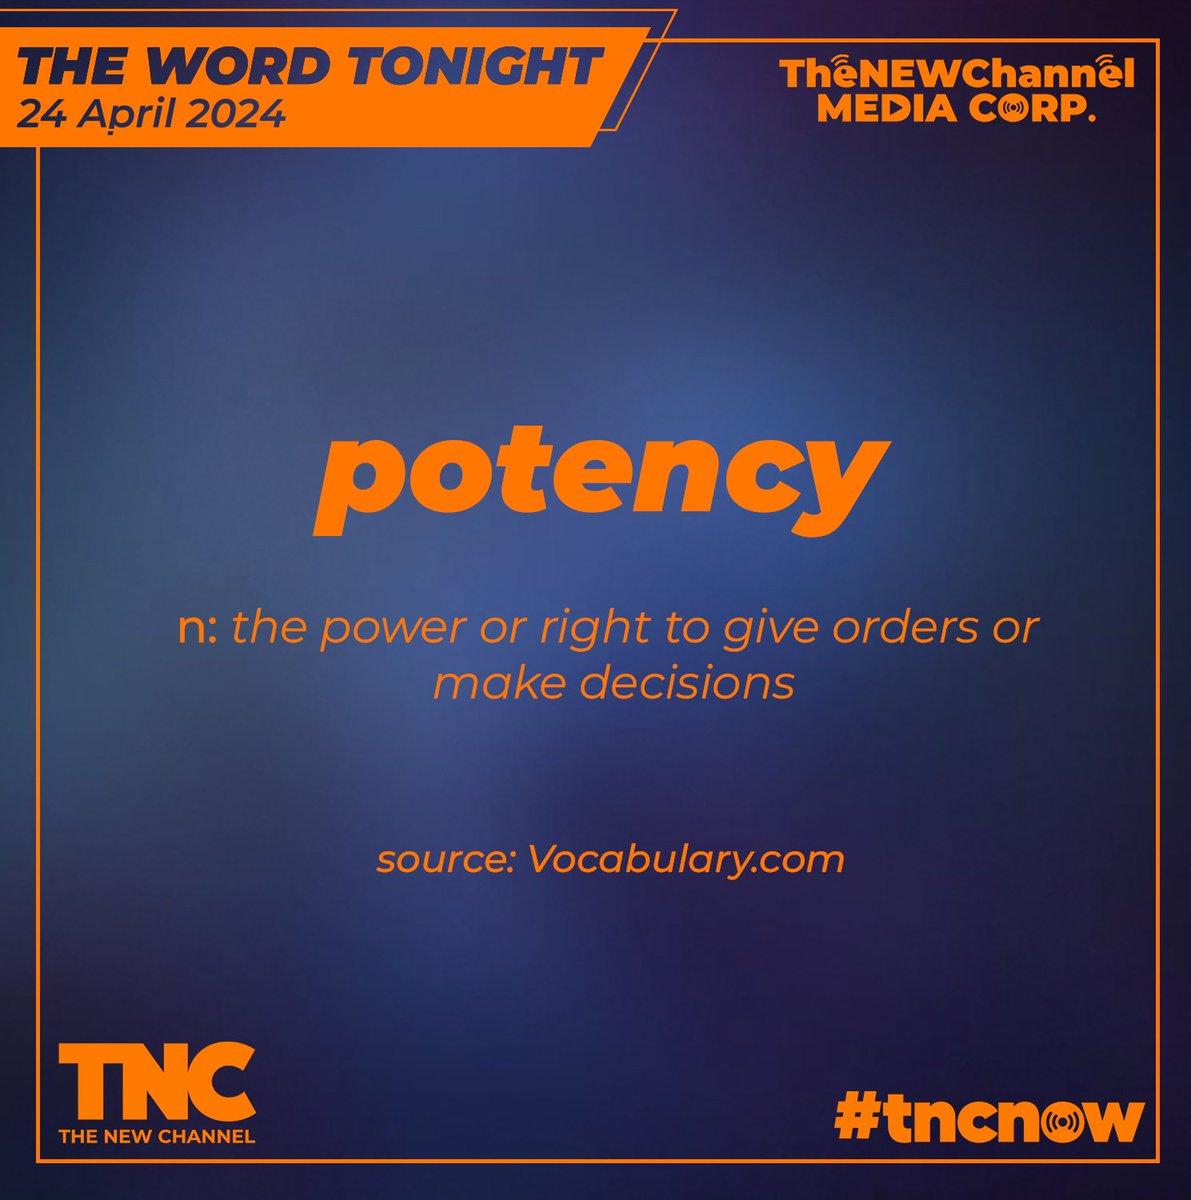 The Word Tonight

24 April 2024

potency
/ˈpoʊtnsi/

Noun

the power or right to give orders or make decisions
“a place of potency in the state”

Source: Find out how strong your vocabulary is and learn new words at Vocabulary.com.

#onTNC #Potency #TheWordTonightOnTNC